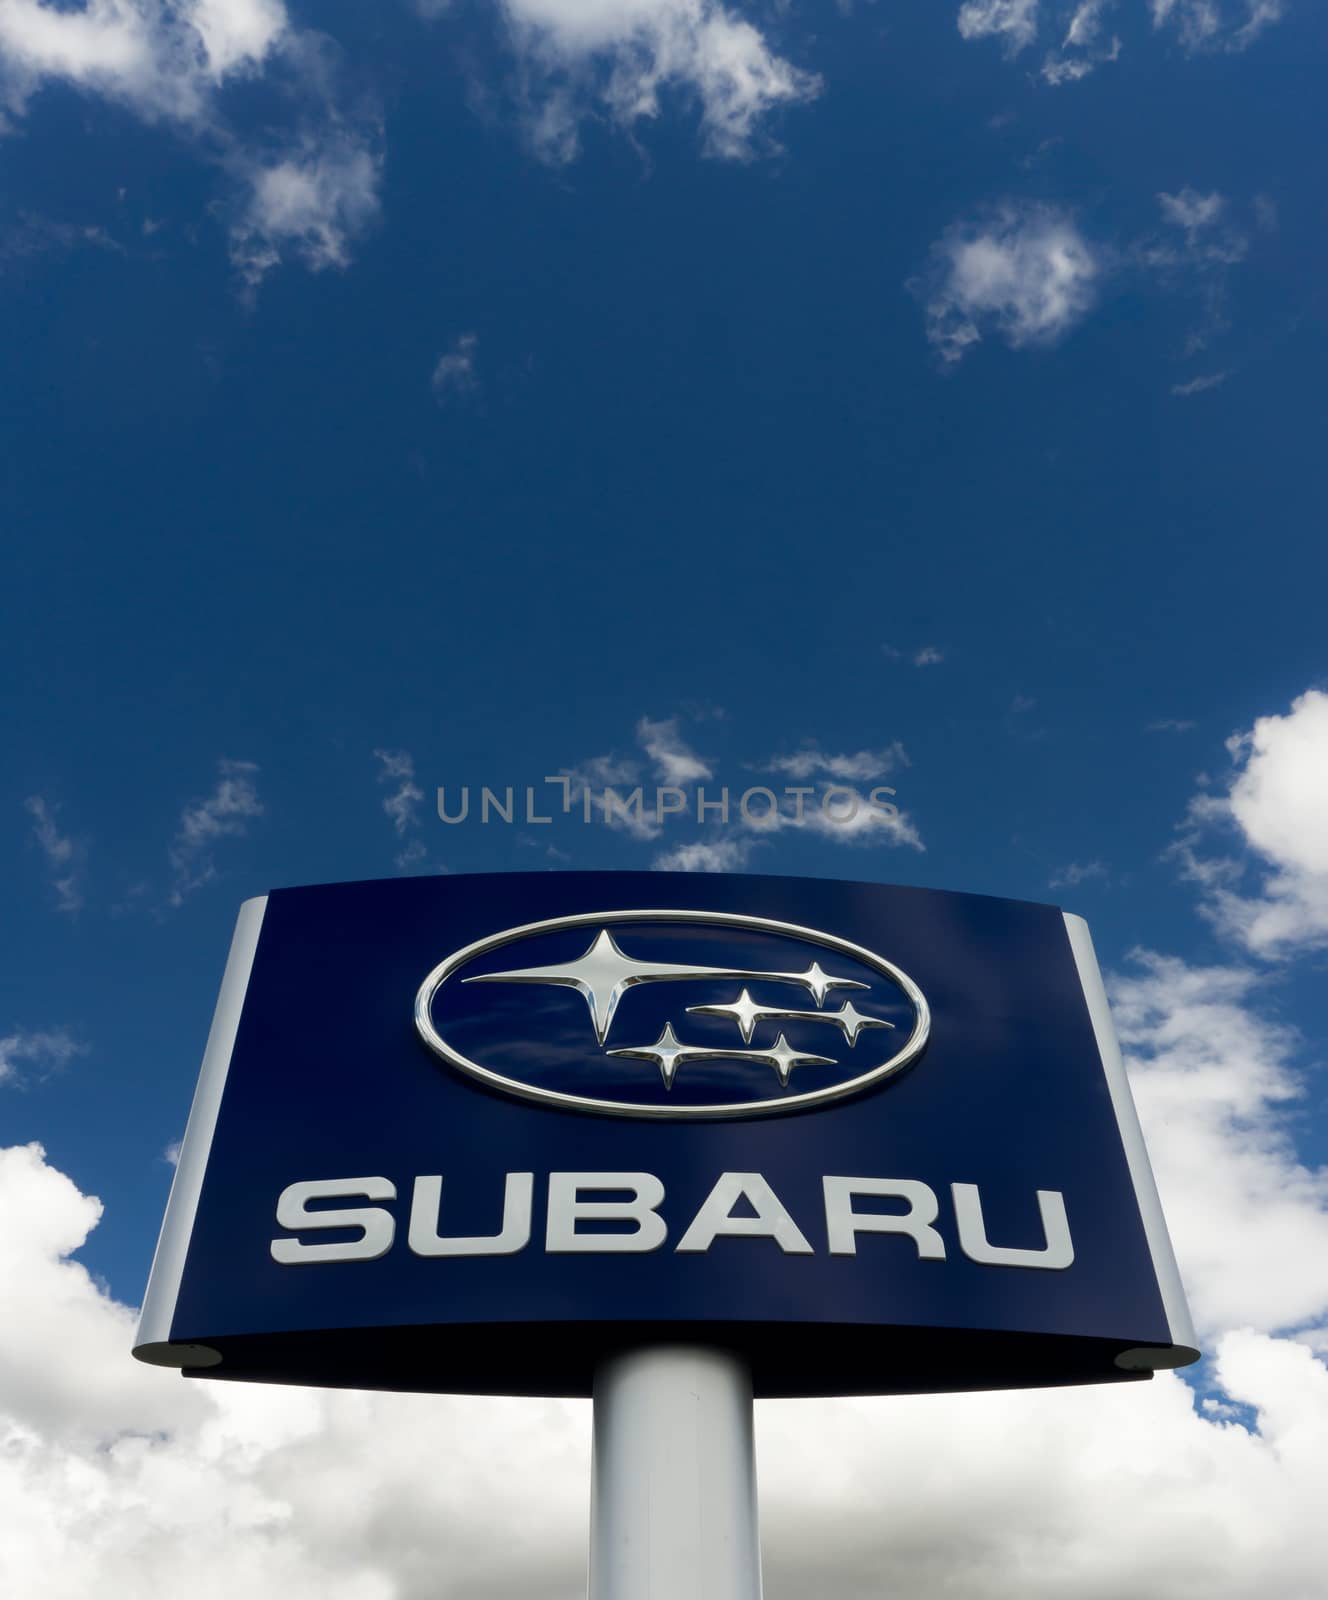 Subaru Automobile Dealership and Sign by wolterk